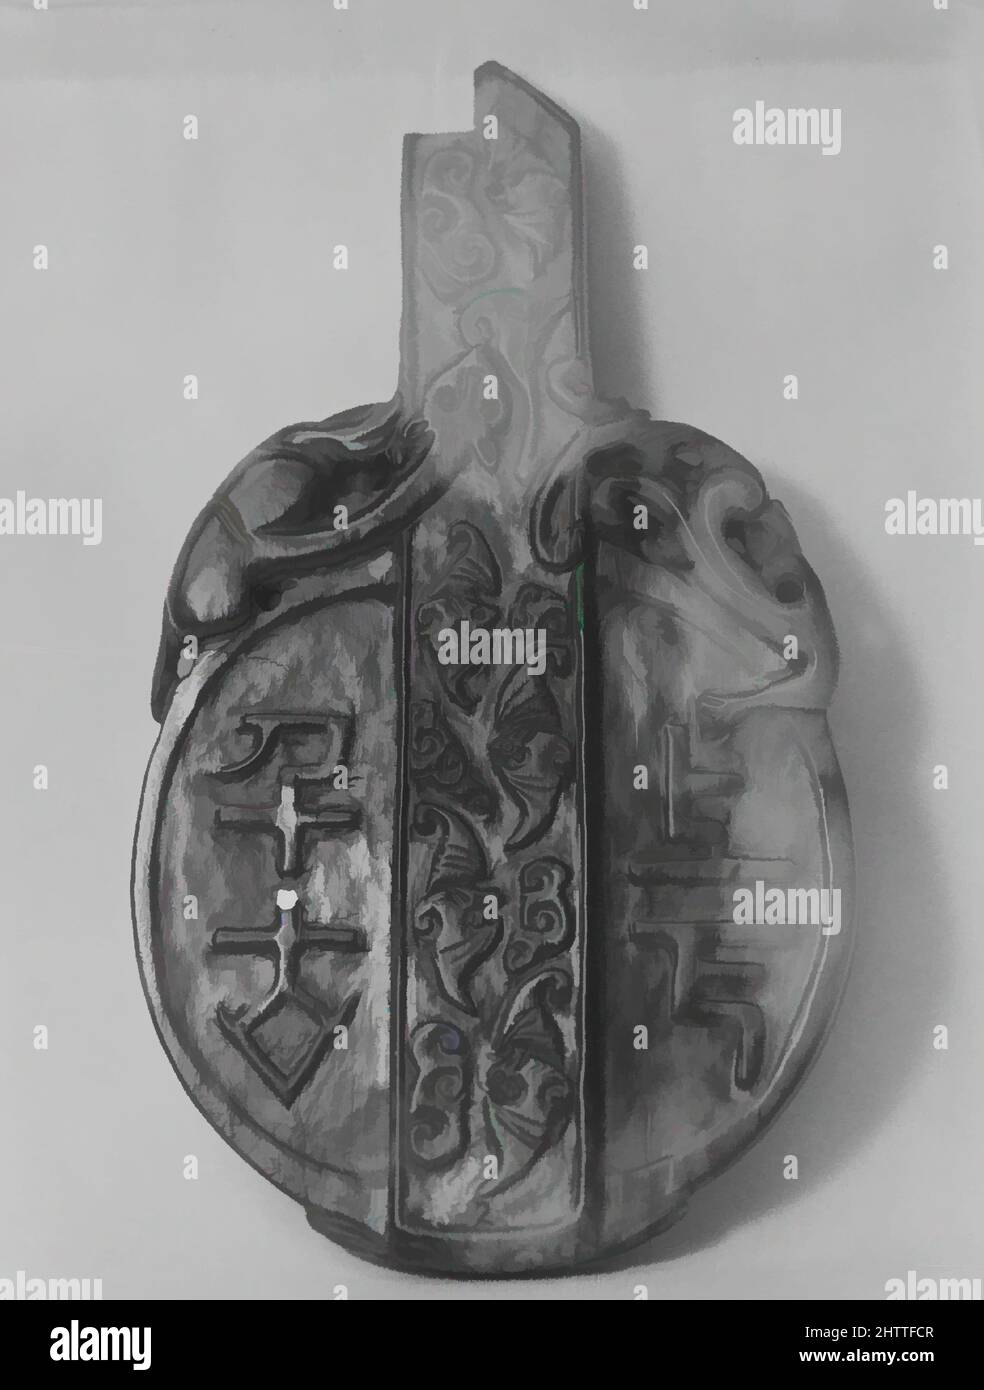 Art inspired by Sacrificial Tablet, Qing dynasty (1644–1911), China, Bowenite, H. 7 9/16 in. (19.2 cm); W. 4 1/2 in. (11.4 cm); L. 9/16 in. (1.4 cm), Hardstone, Classic works modernized by Artotop with a splash of modernity. Shapes, color and value, eye-catching visual impact on art. Emotions through freedom of artworks in a contemporary way. A timeless message pursuing a wildly creative new direction. Artists turning to the digital medium and creating the Artotop NFT Stock Photo